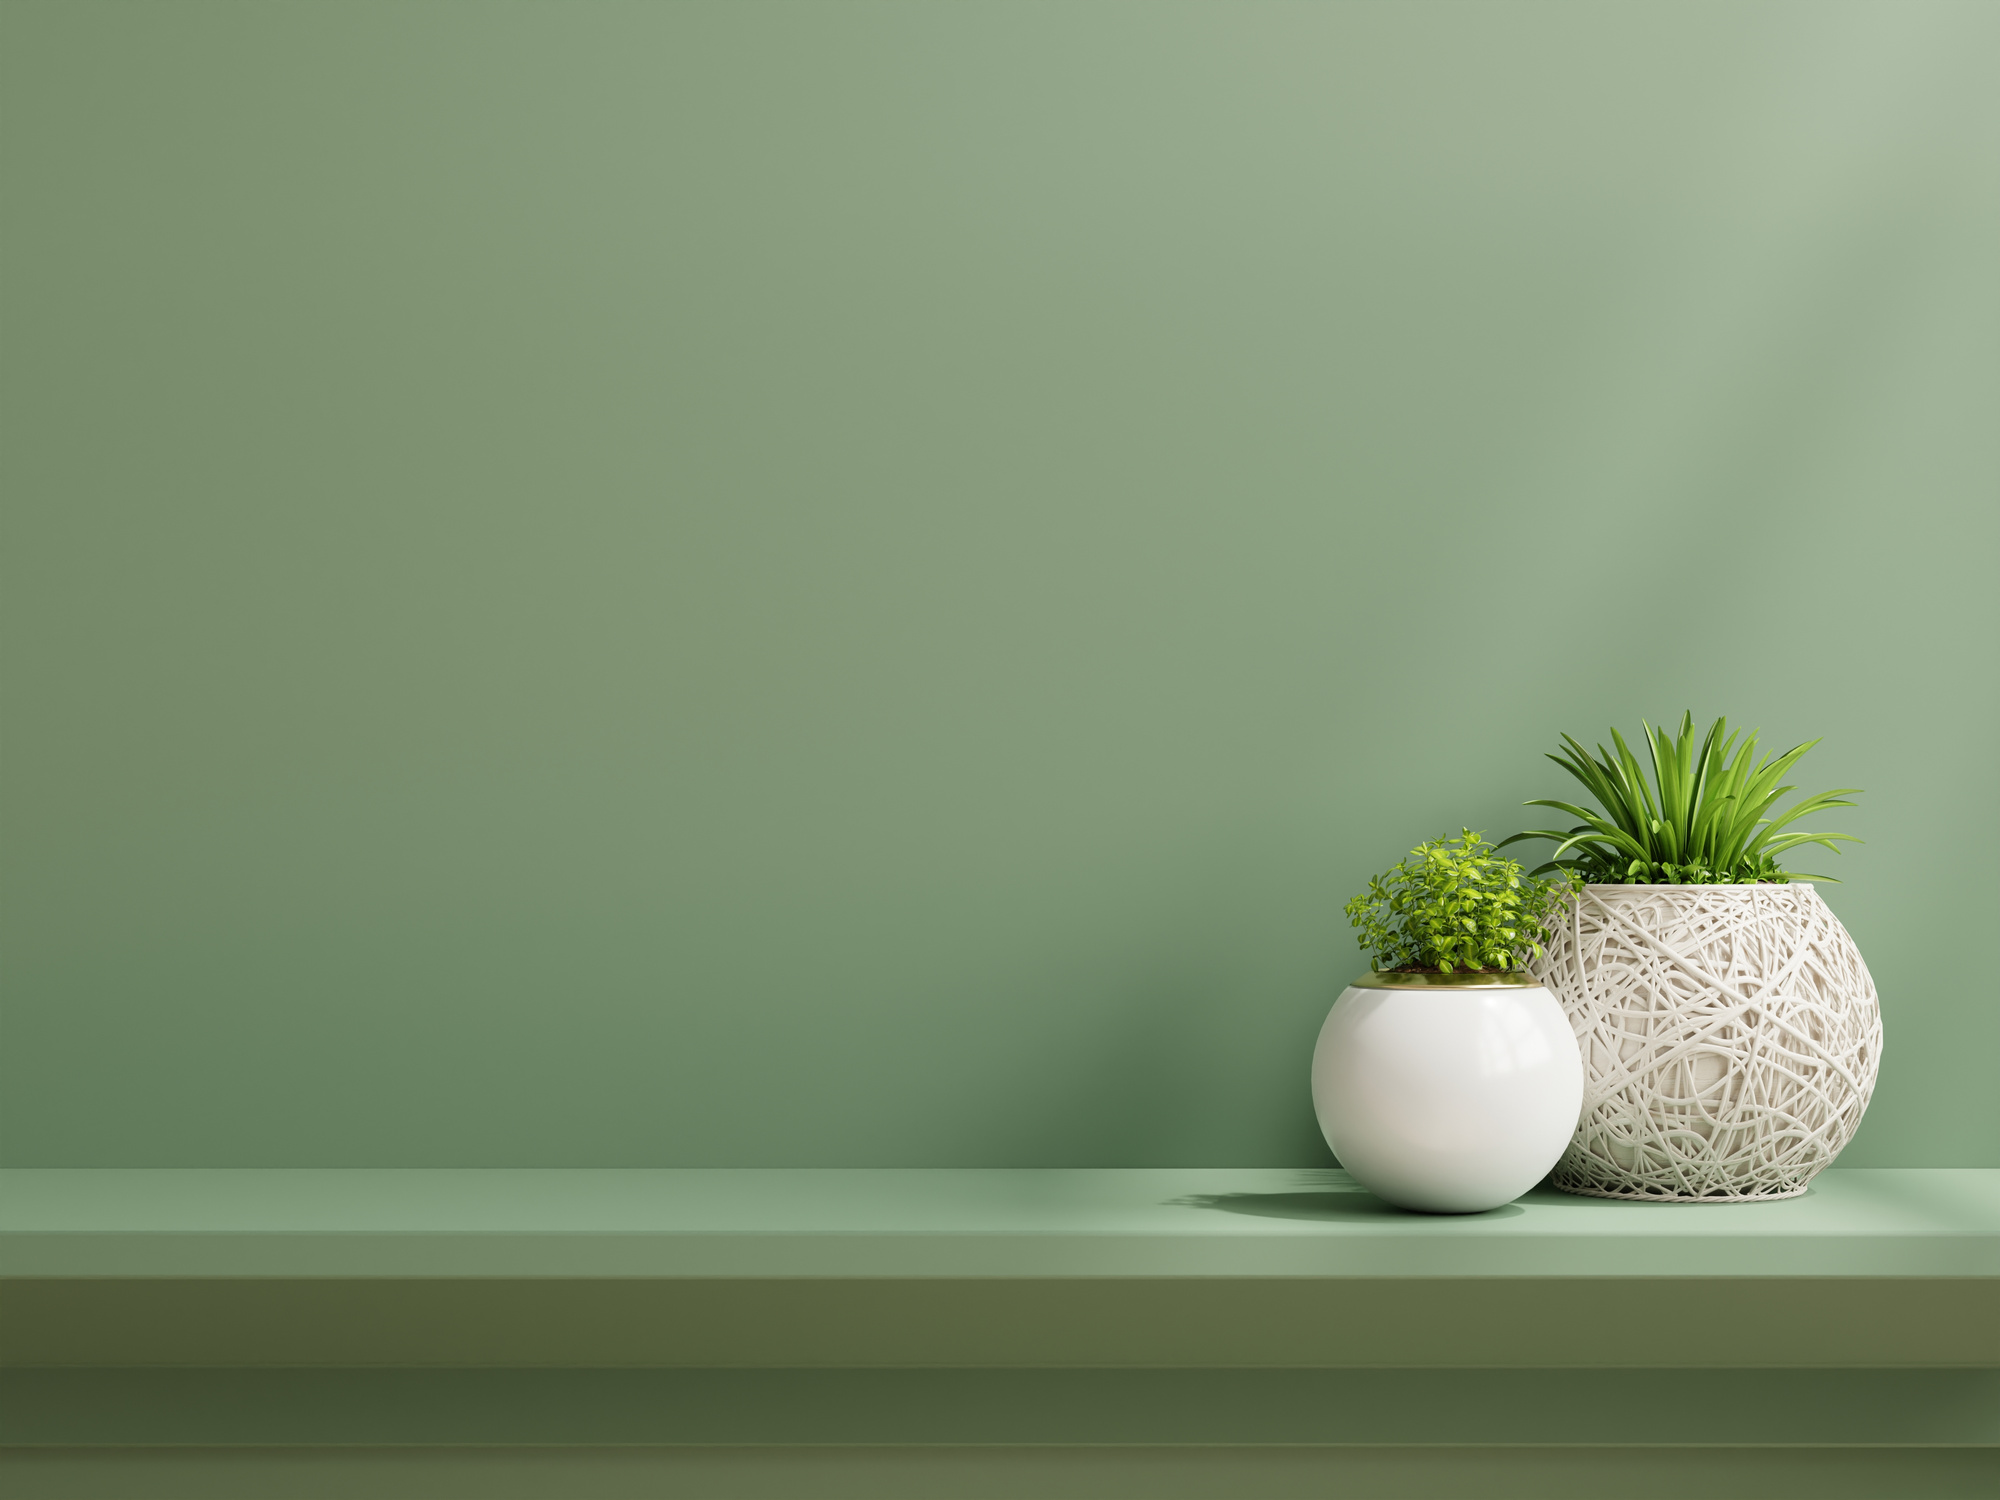 Interior Wall Mockup with Plants, Green Wall and Shelf